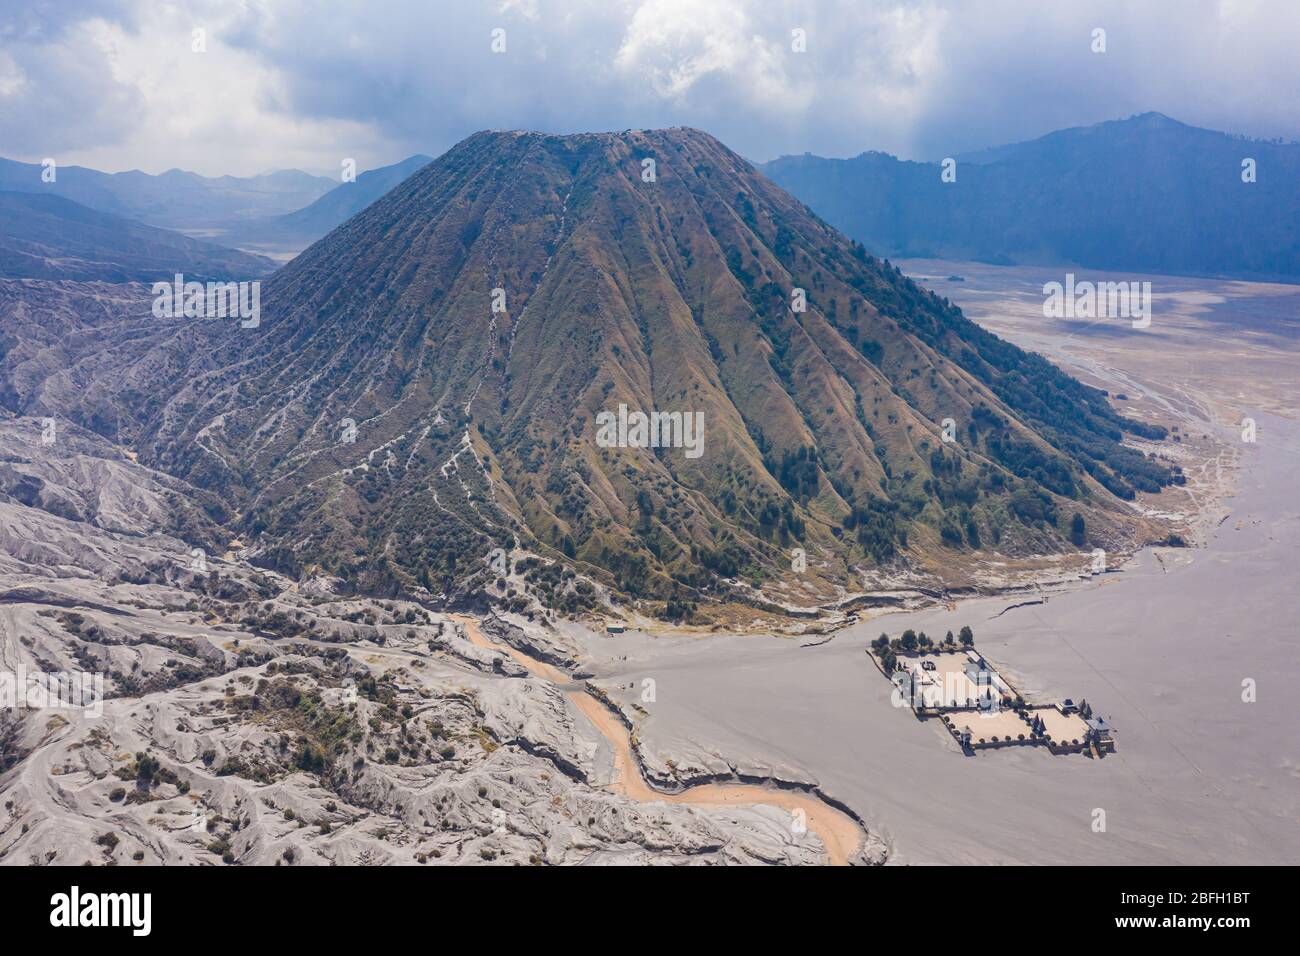 Aerial view of the volcanic cinder cone Mount Batok in the Mount Bromo national park, Java, Indonesia Stock Photo